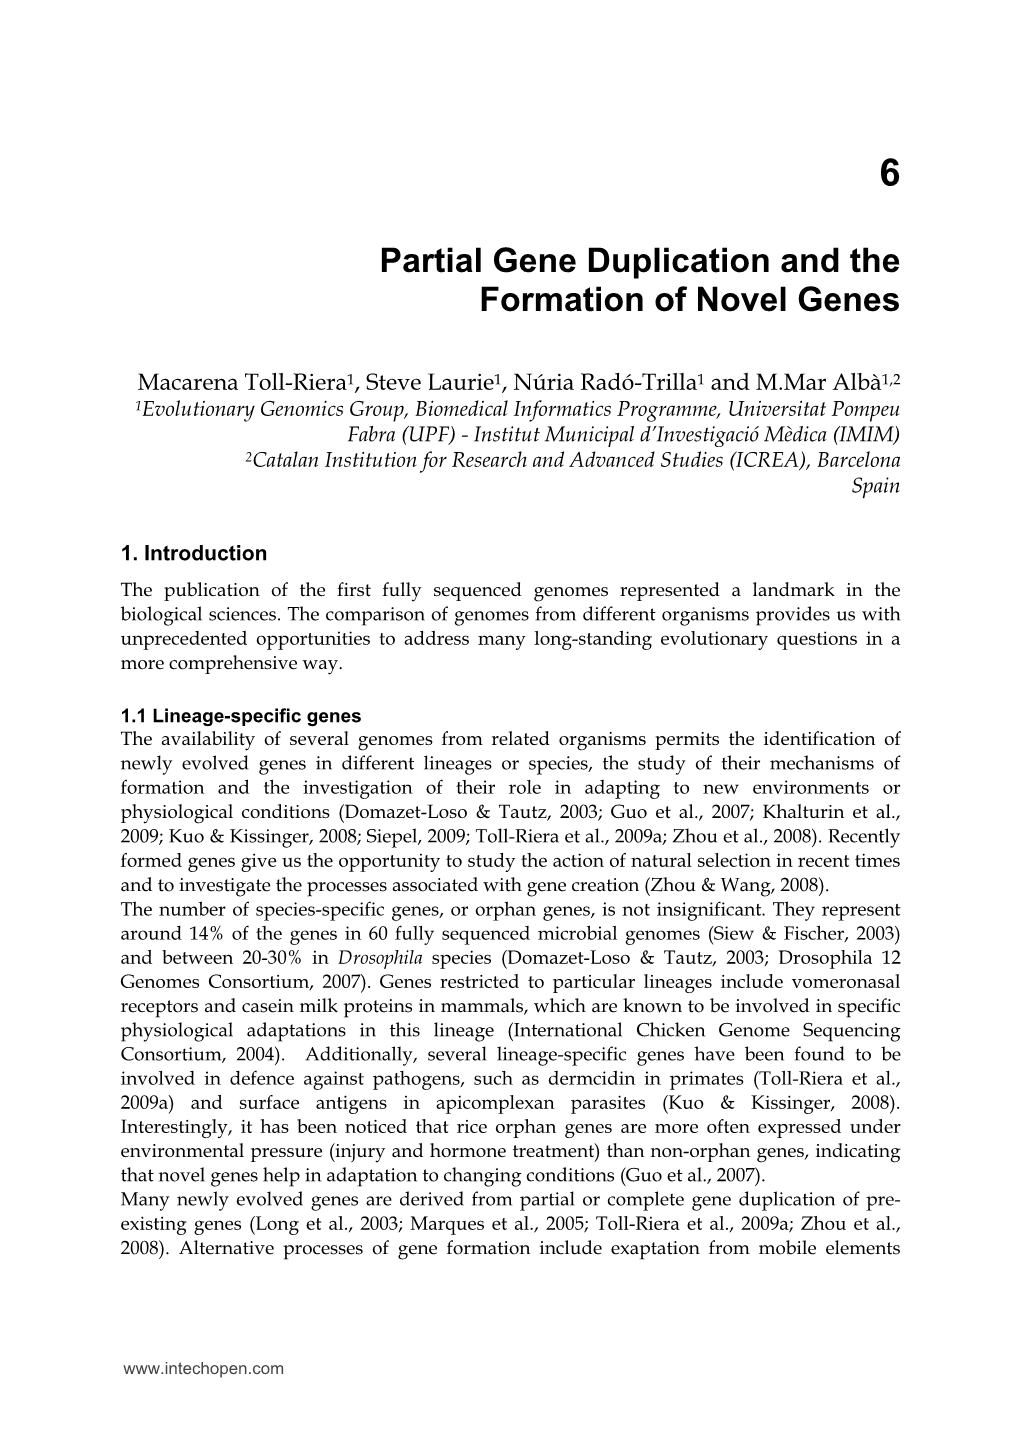 Partial Gene Duplication and the Formation of Novel Genes